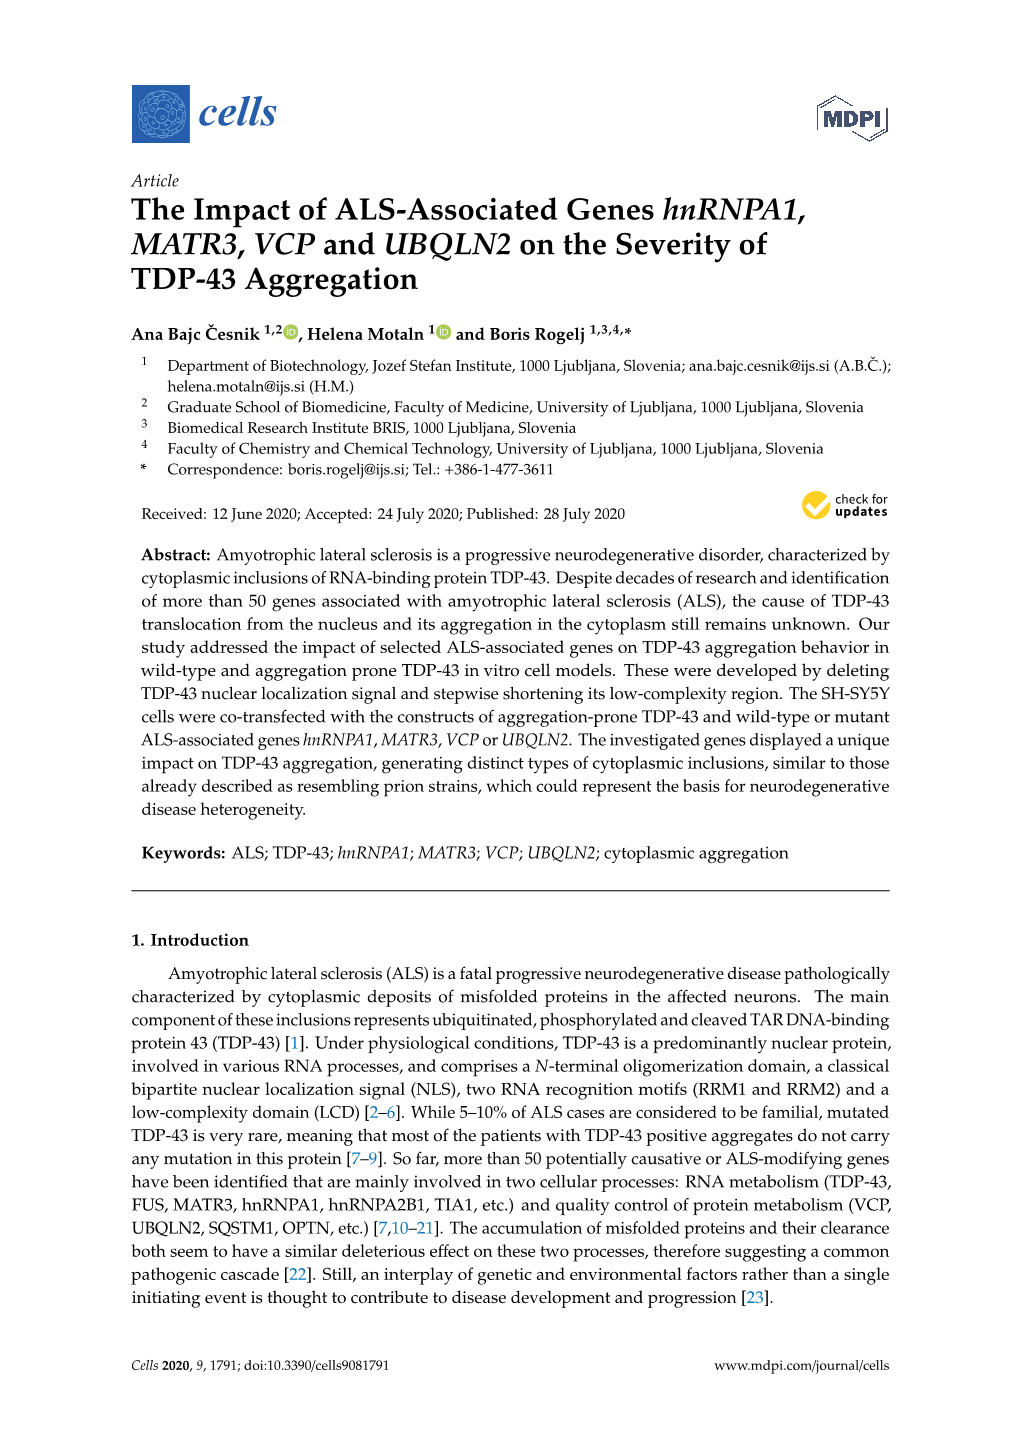 The Impact of ALS-Associated Genes Hnrnpa1, MATR3, VCP and UBQLN2 on the Severity of TDP-43 Aggregation